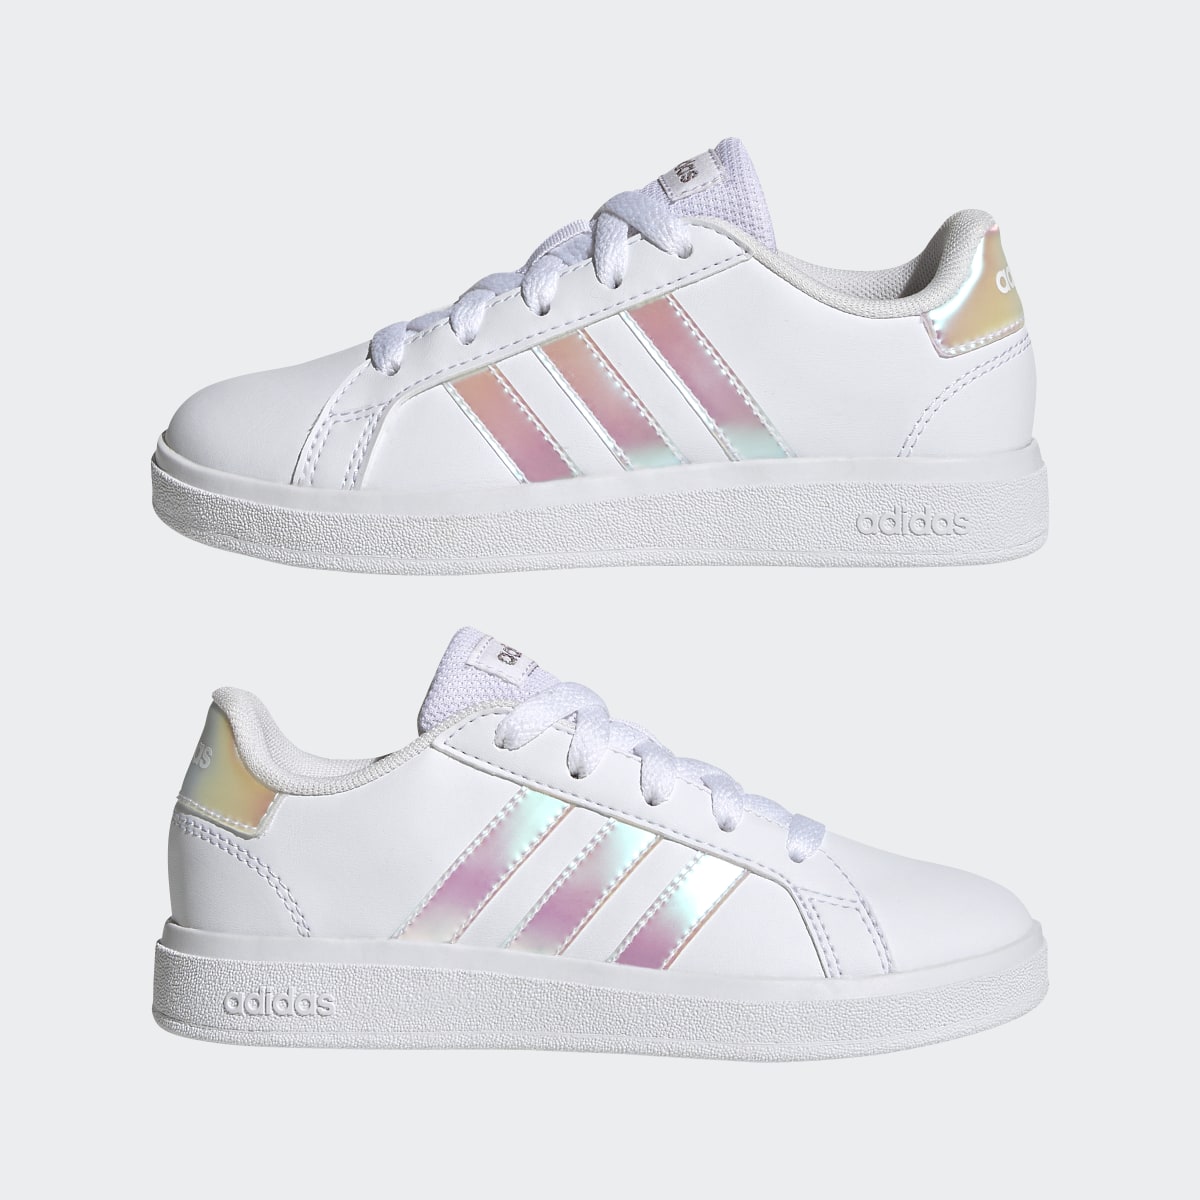 Adidas Grand Court Lifestyle Lace Tennis Schuh. 8